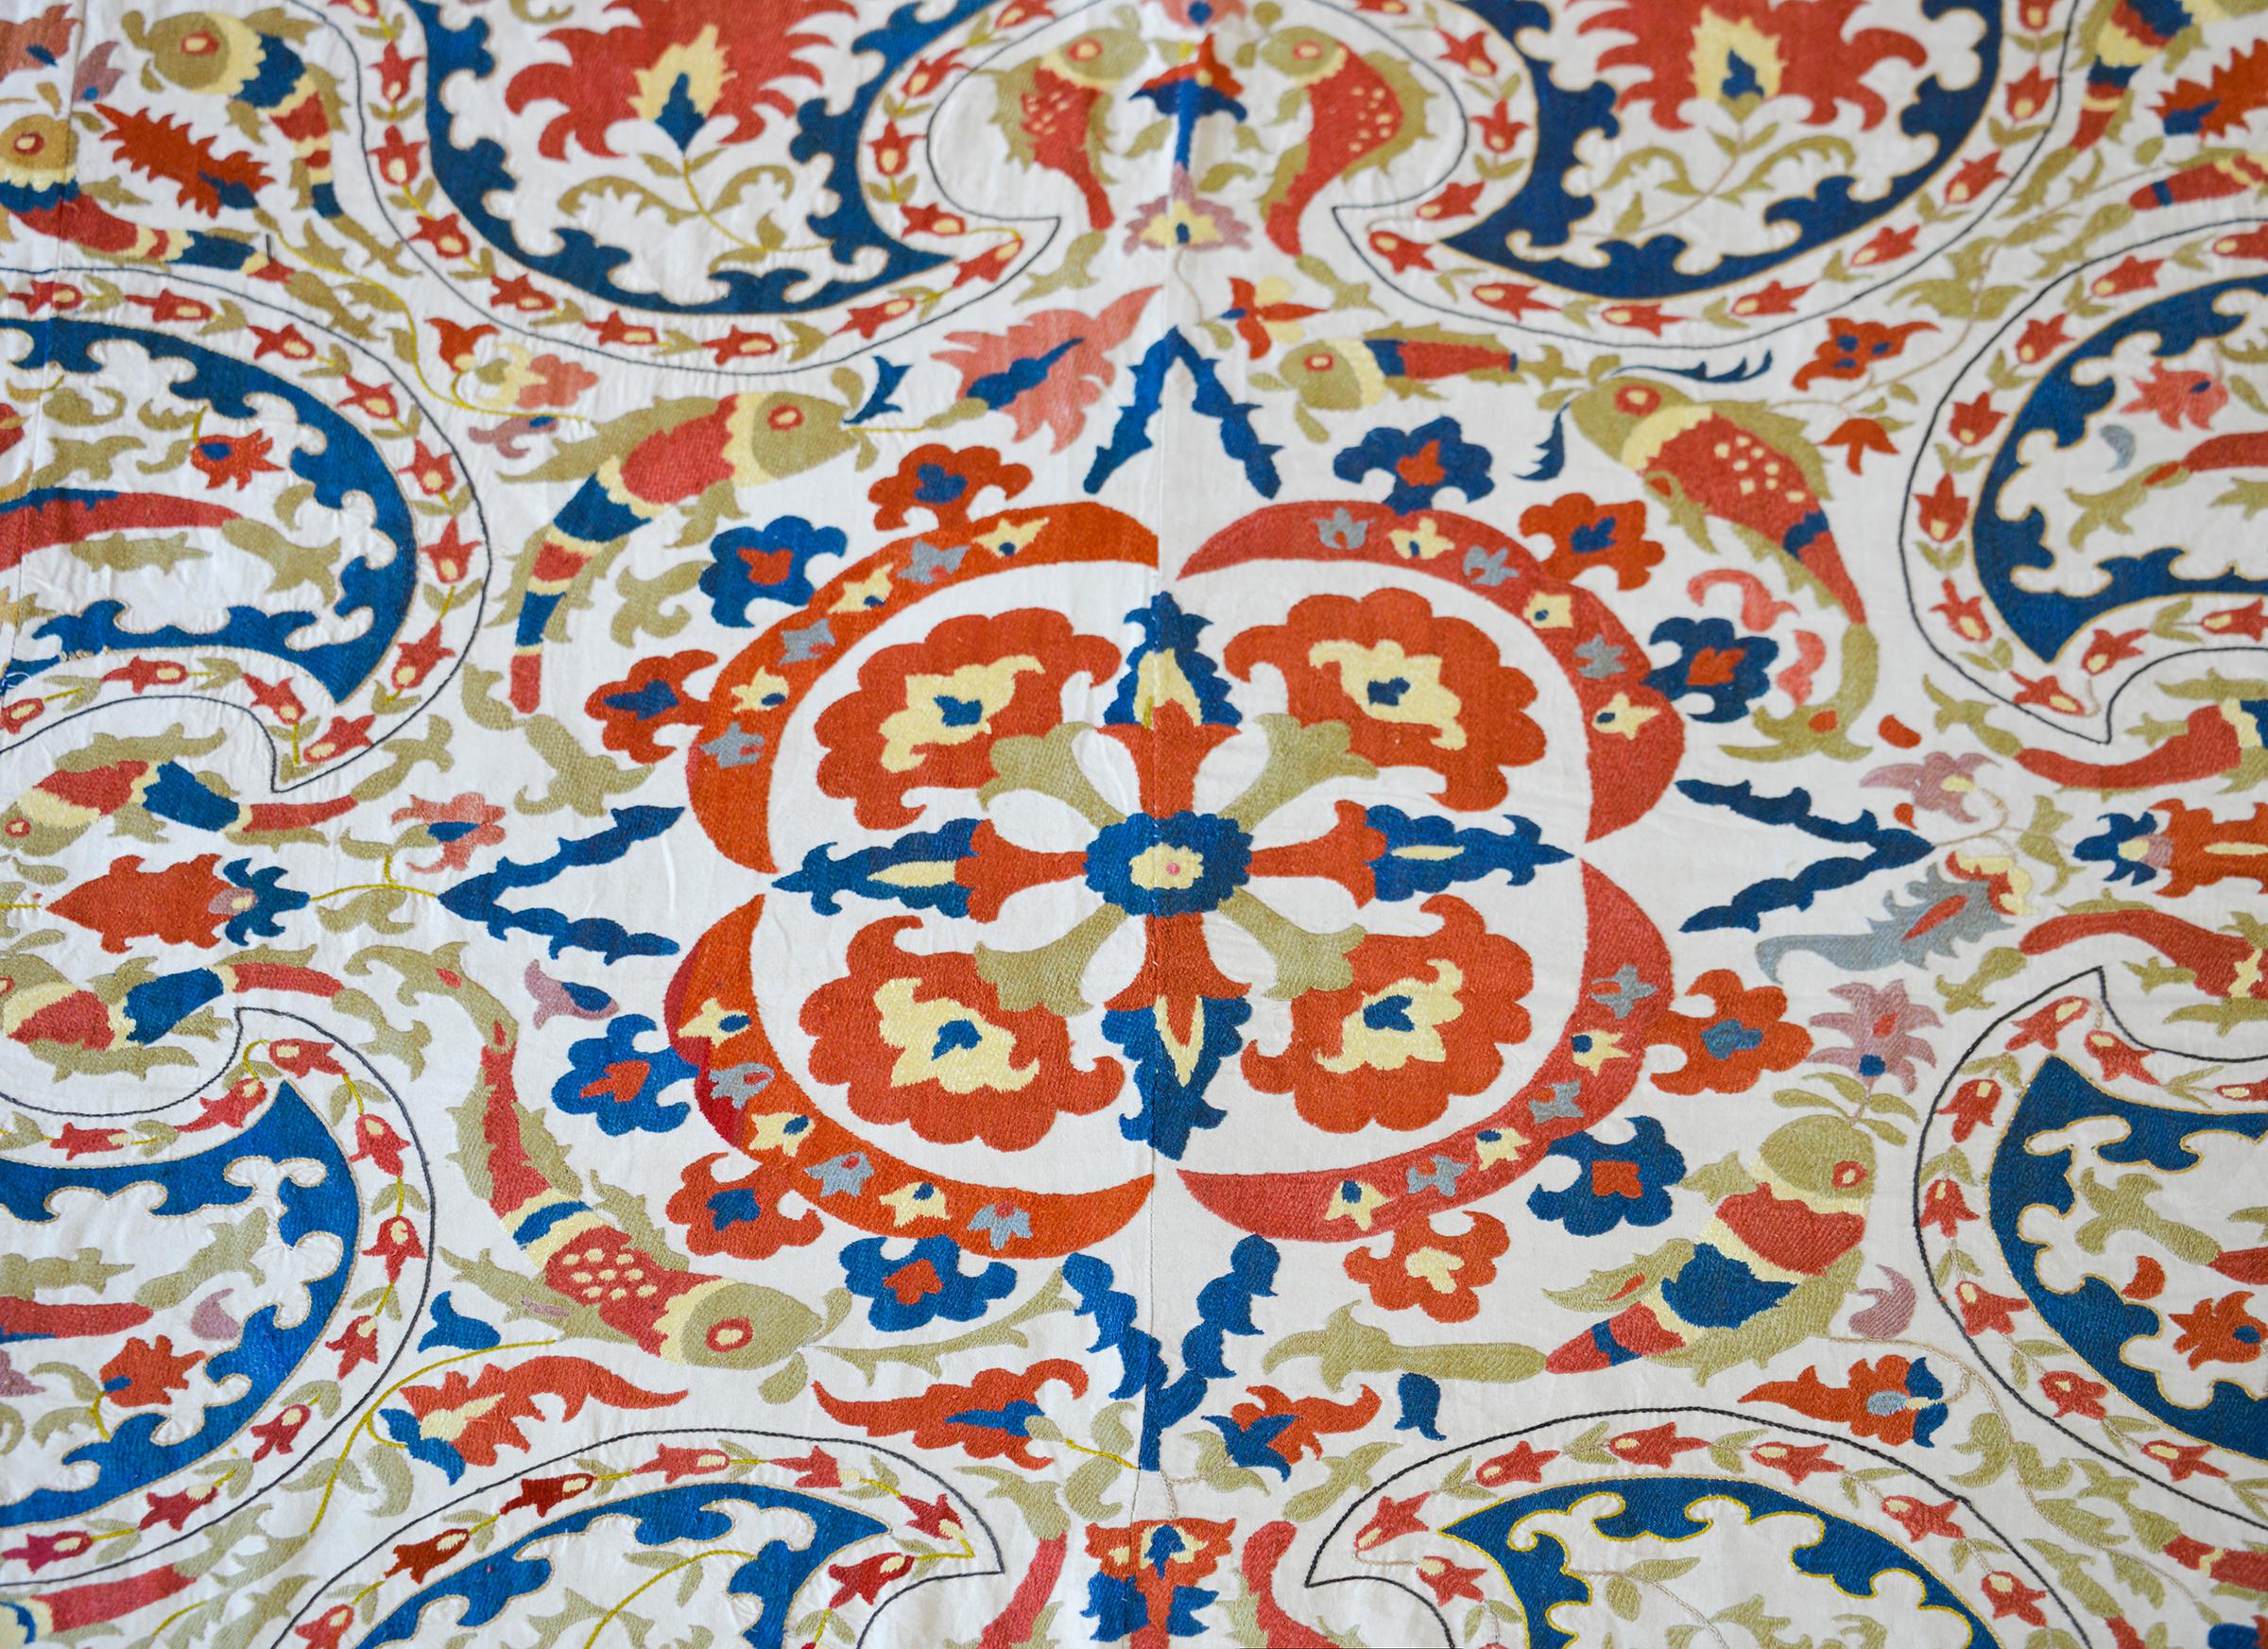 A striking vintage Uzbek Suzani with the most wonderful hand-embroidered pattern containing large-scale flowers, leaves, and vines, and myriad leaping fish, all woven in brilliant reds, golds, and blue silk thread, set against a white cotton backing.